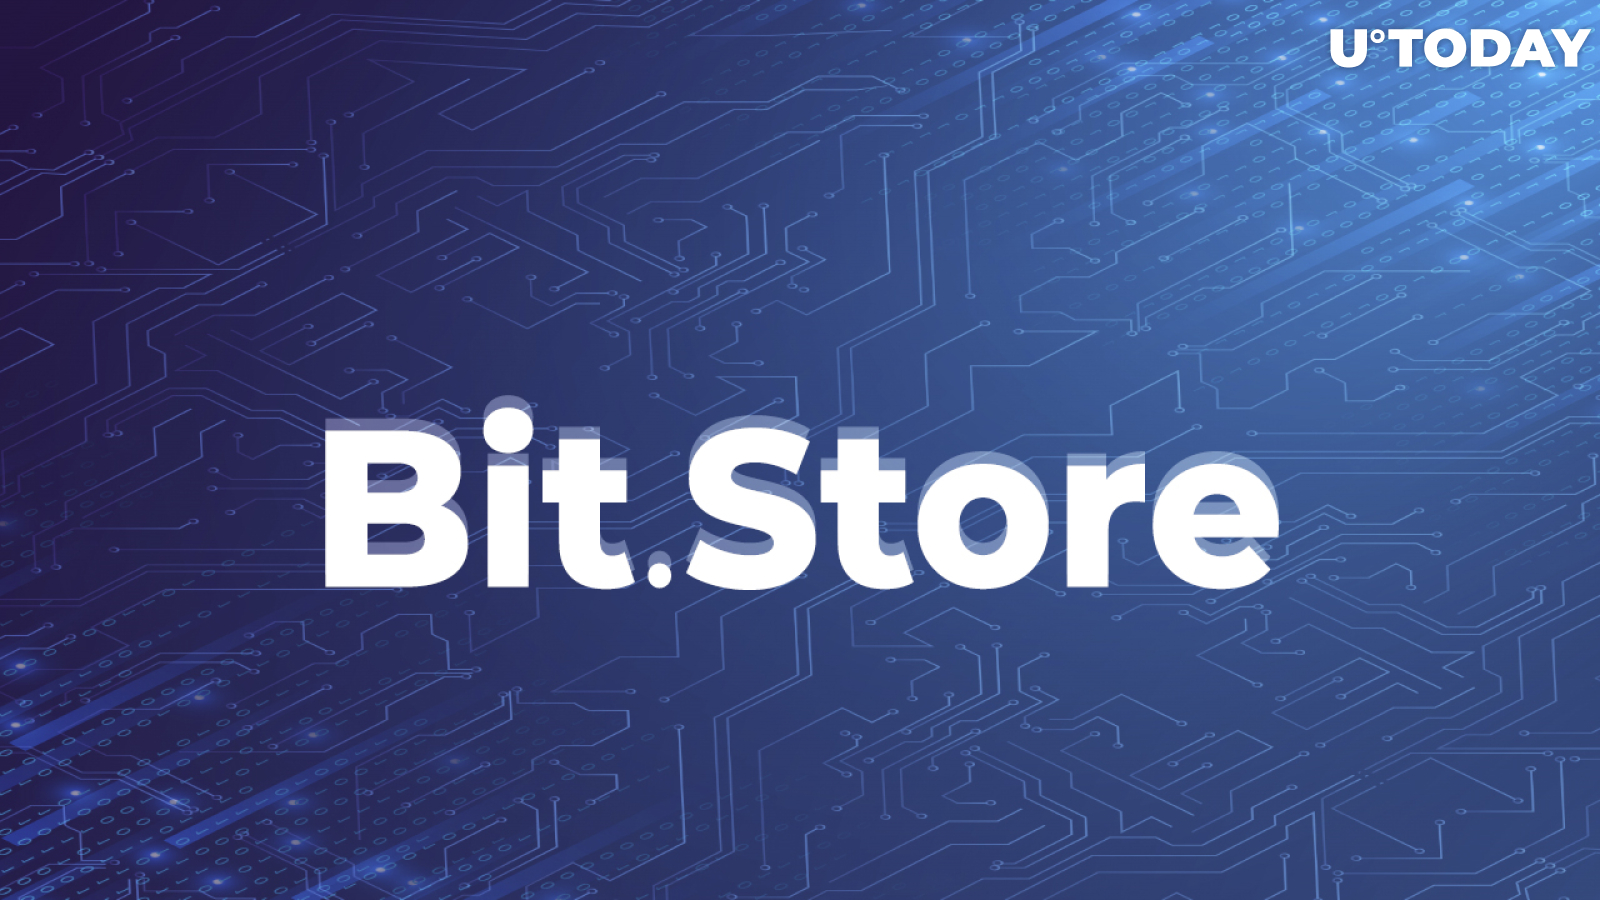 Bit.Store: The Answer to Southeast Asia's Need for Fiat-Cryptocurrency On-Ramp Platform